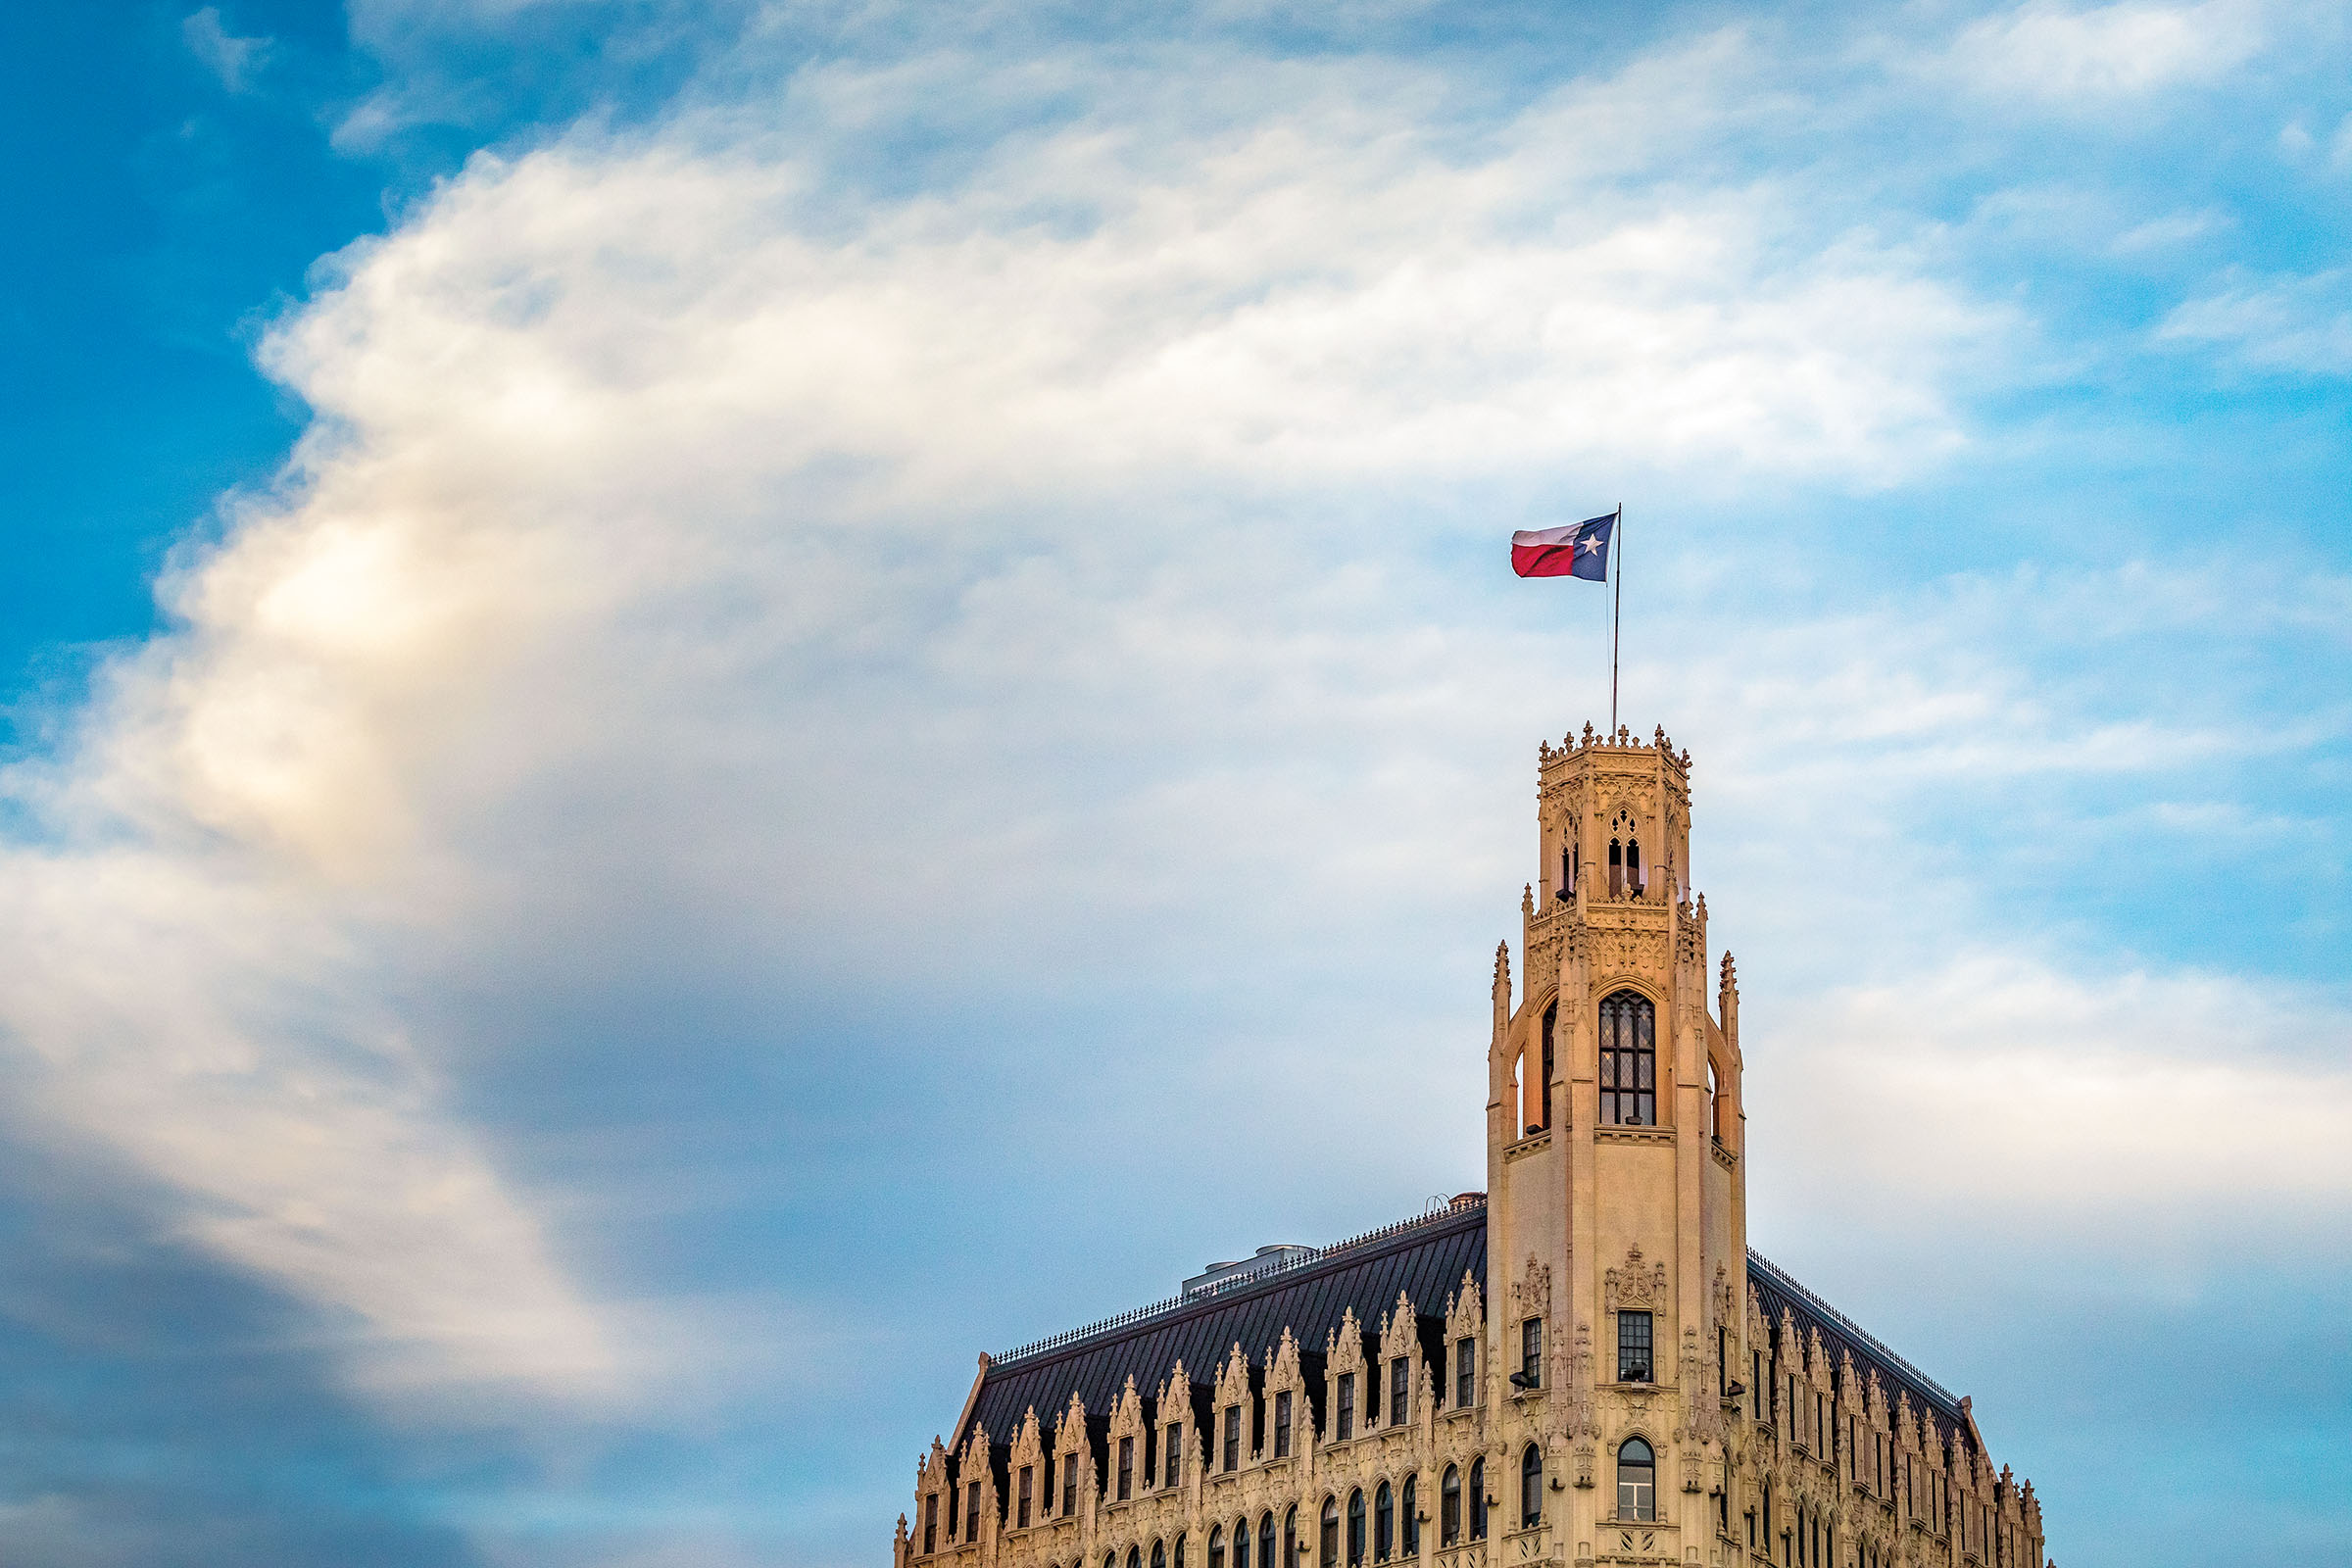 The top of an old building adorned with a Texas flag in front of a blue sky with clouds